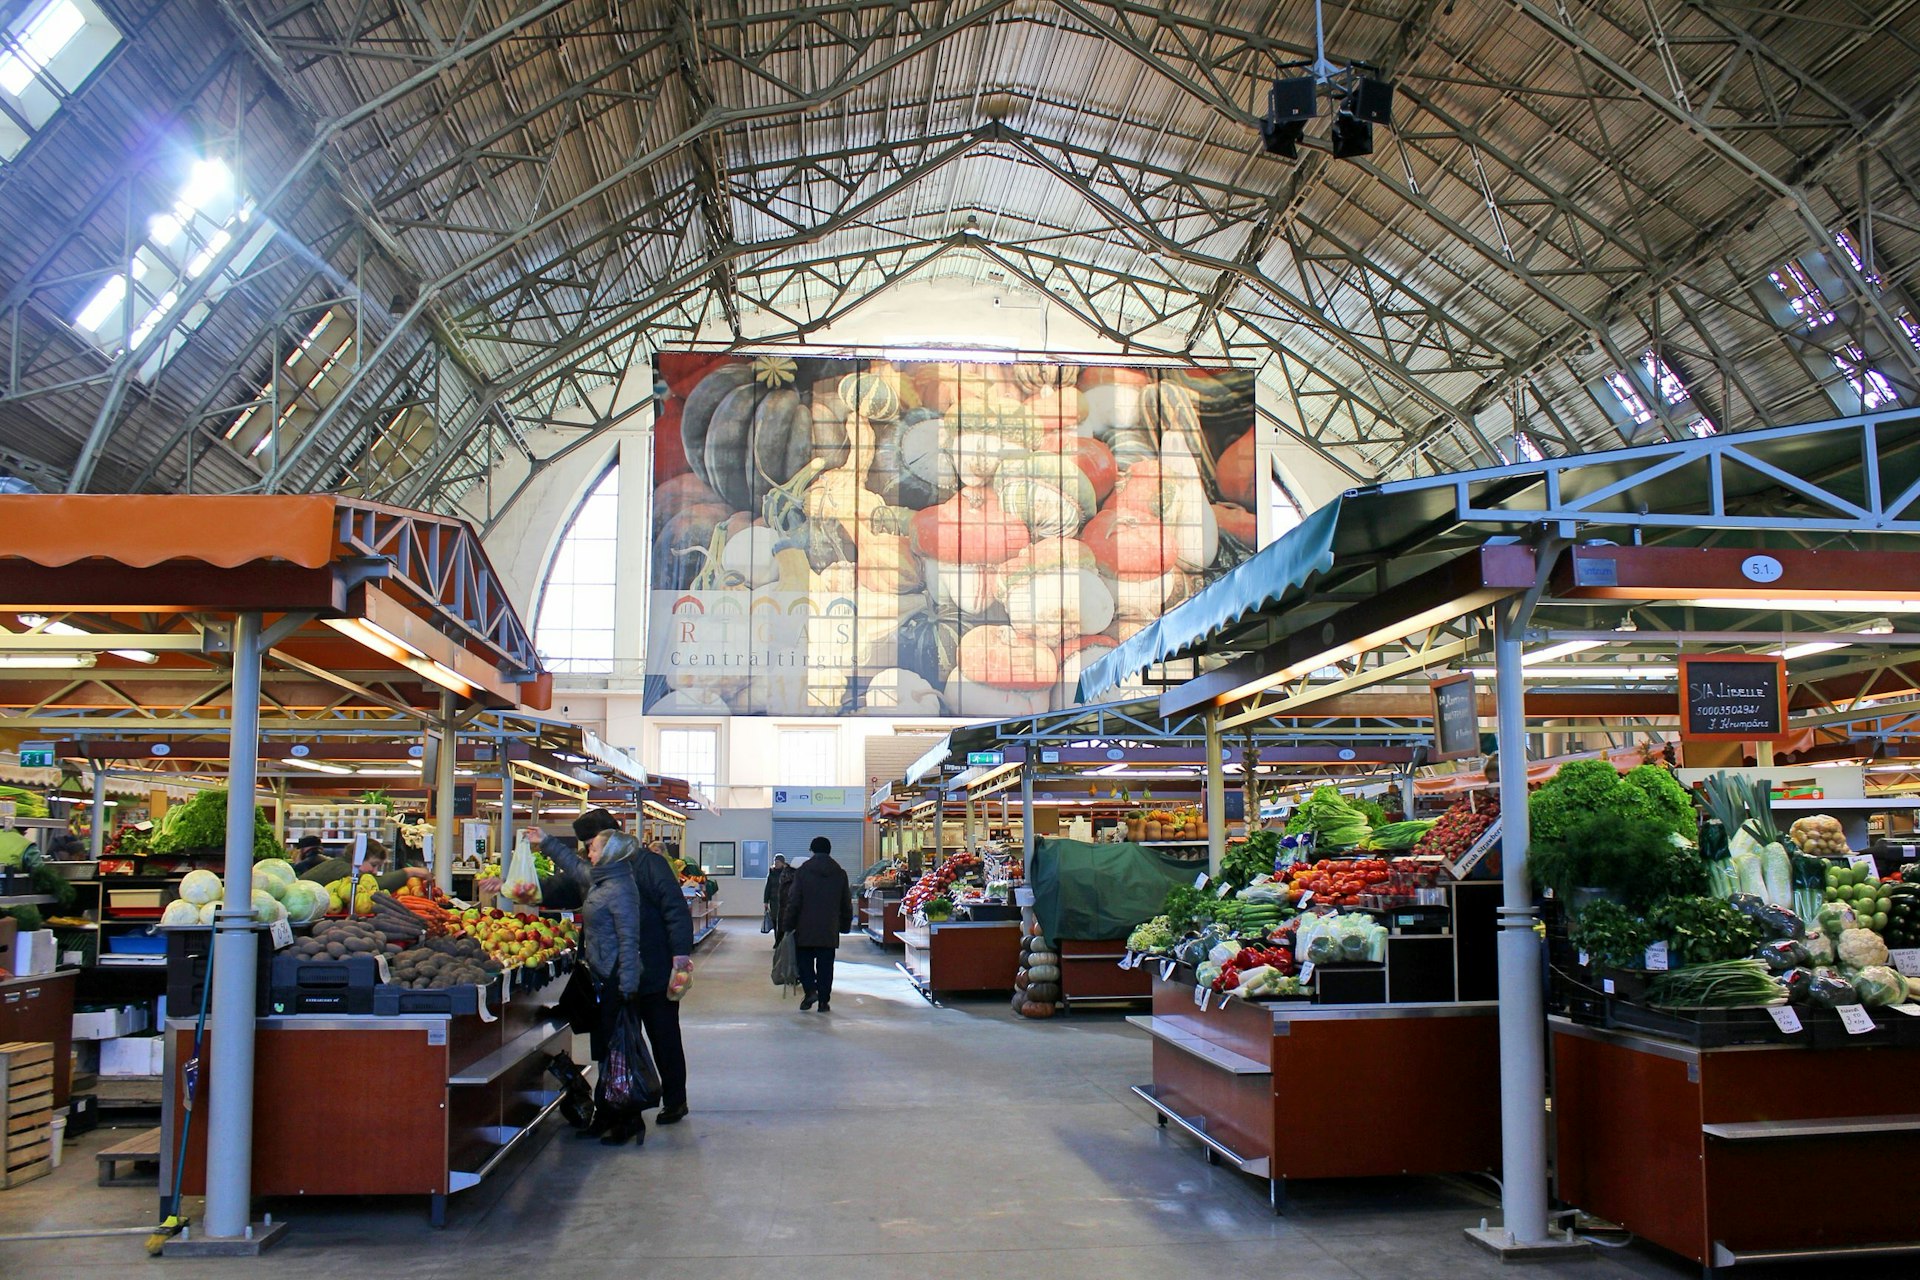 Customers browse the fresh produce on the stalls in one of the vast Zeppelin hangars that now make up Rīga Central Market © Caroline Hadamitzky / Lonely Planet